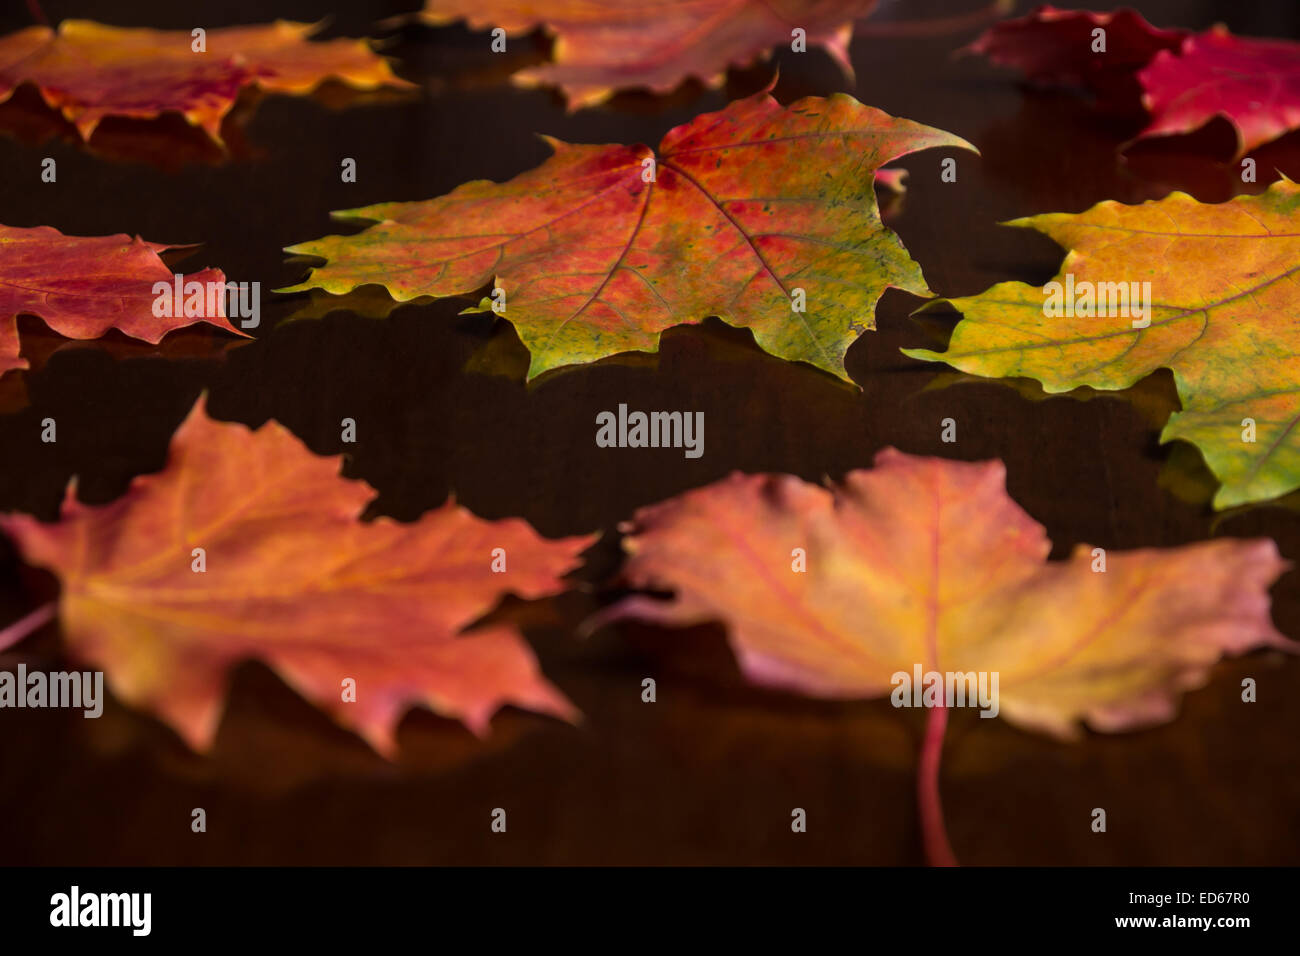 autumn leaves on a wood table Stock Photo